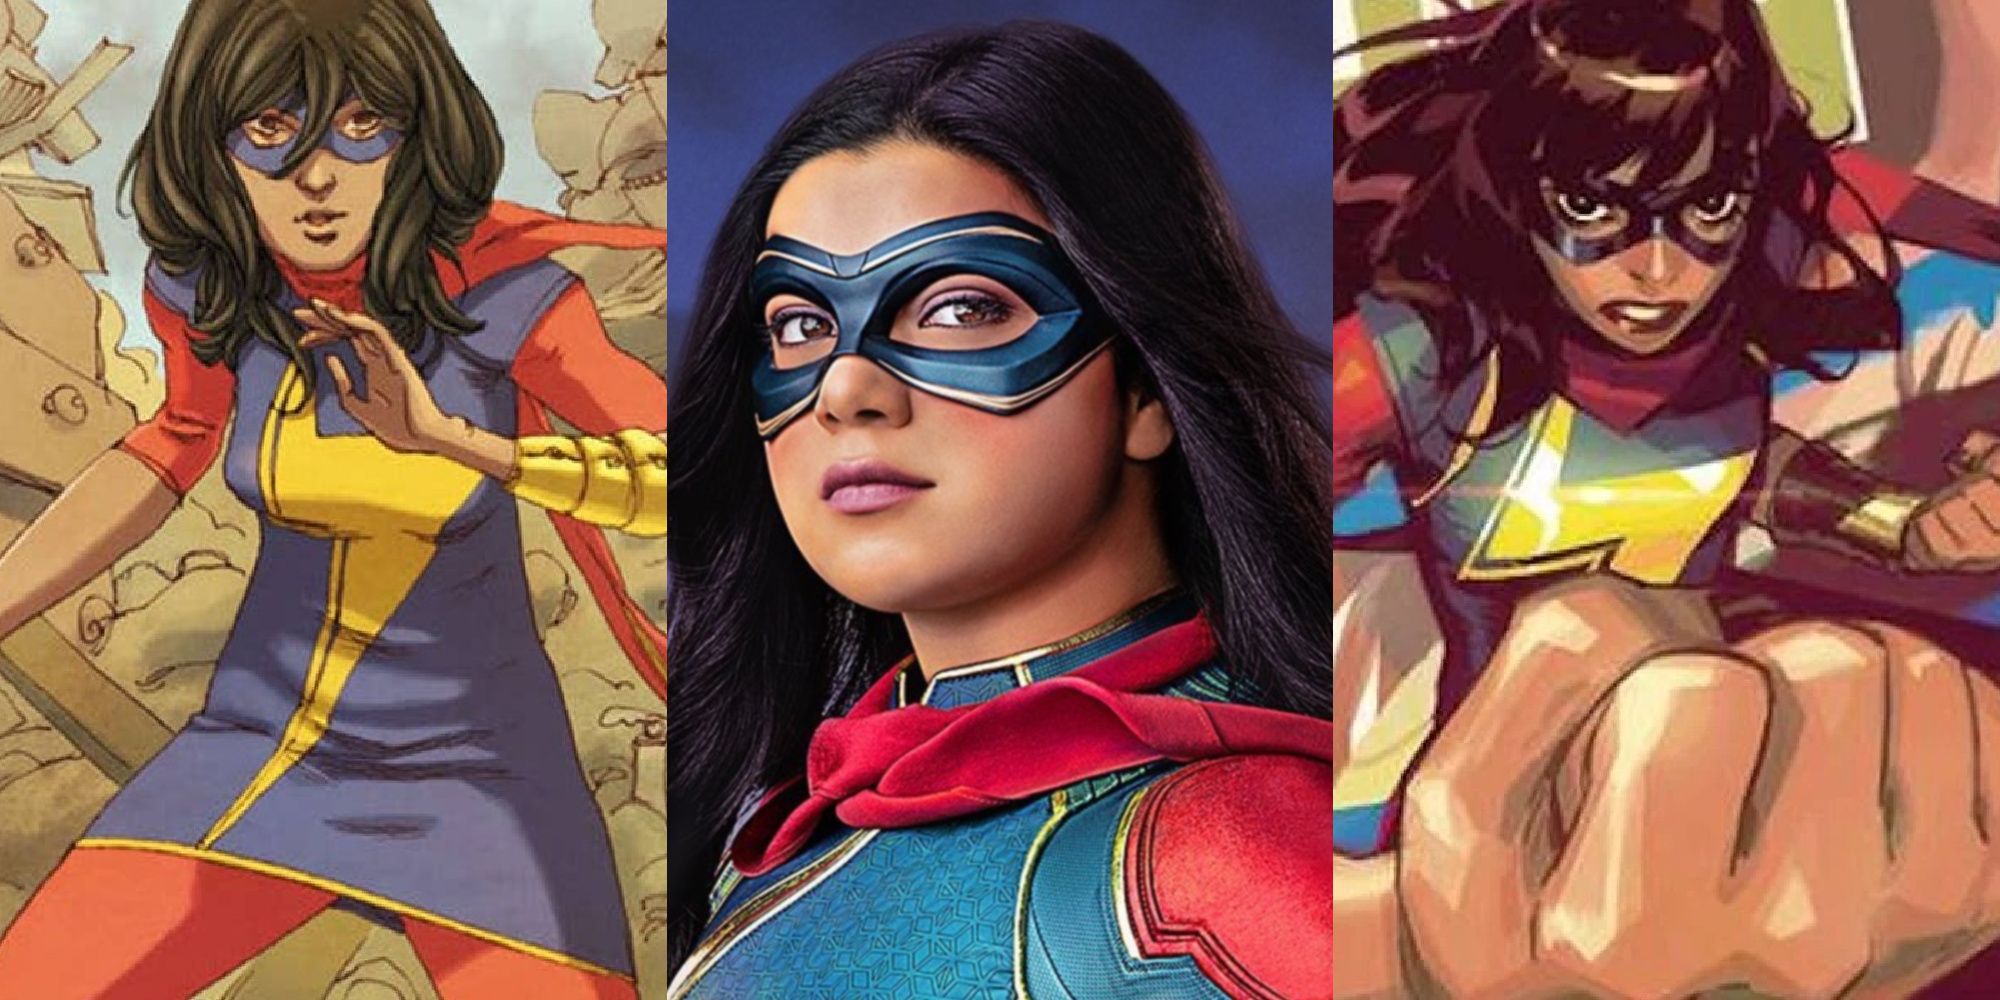 Split image of Ms. Marvel from Marvel Comics and MCU series.